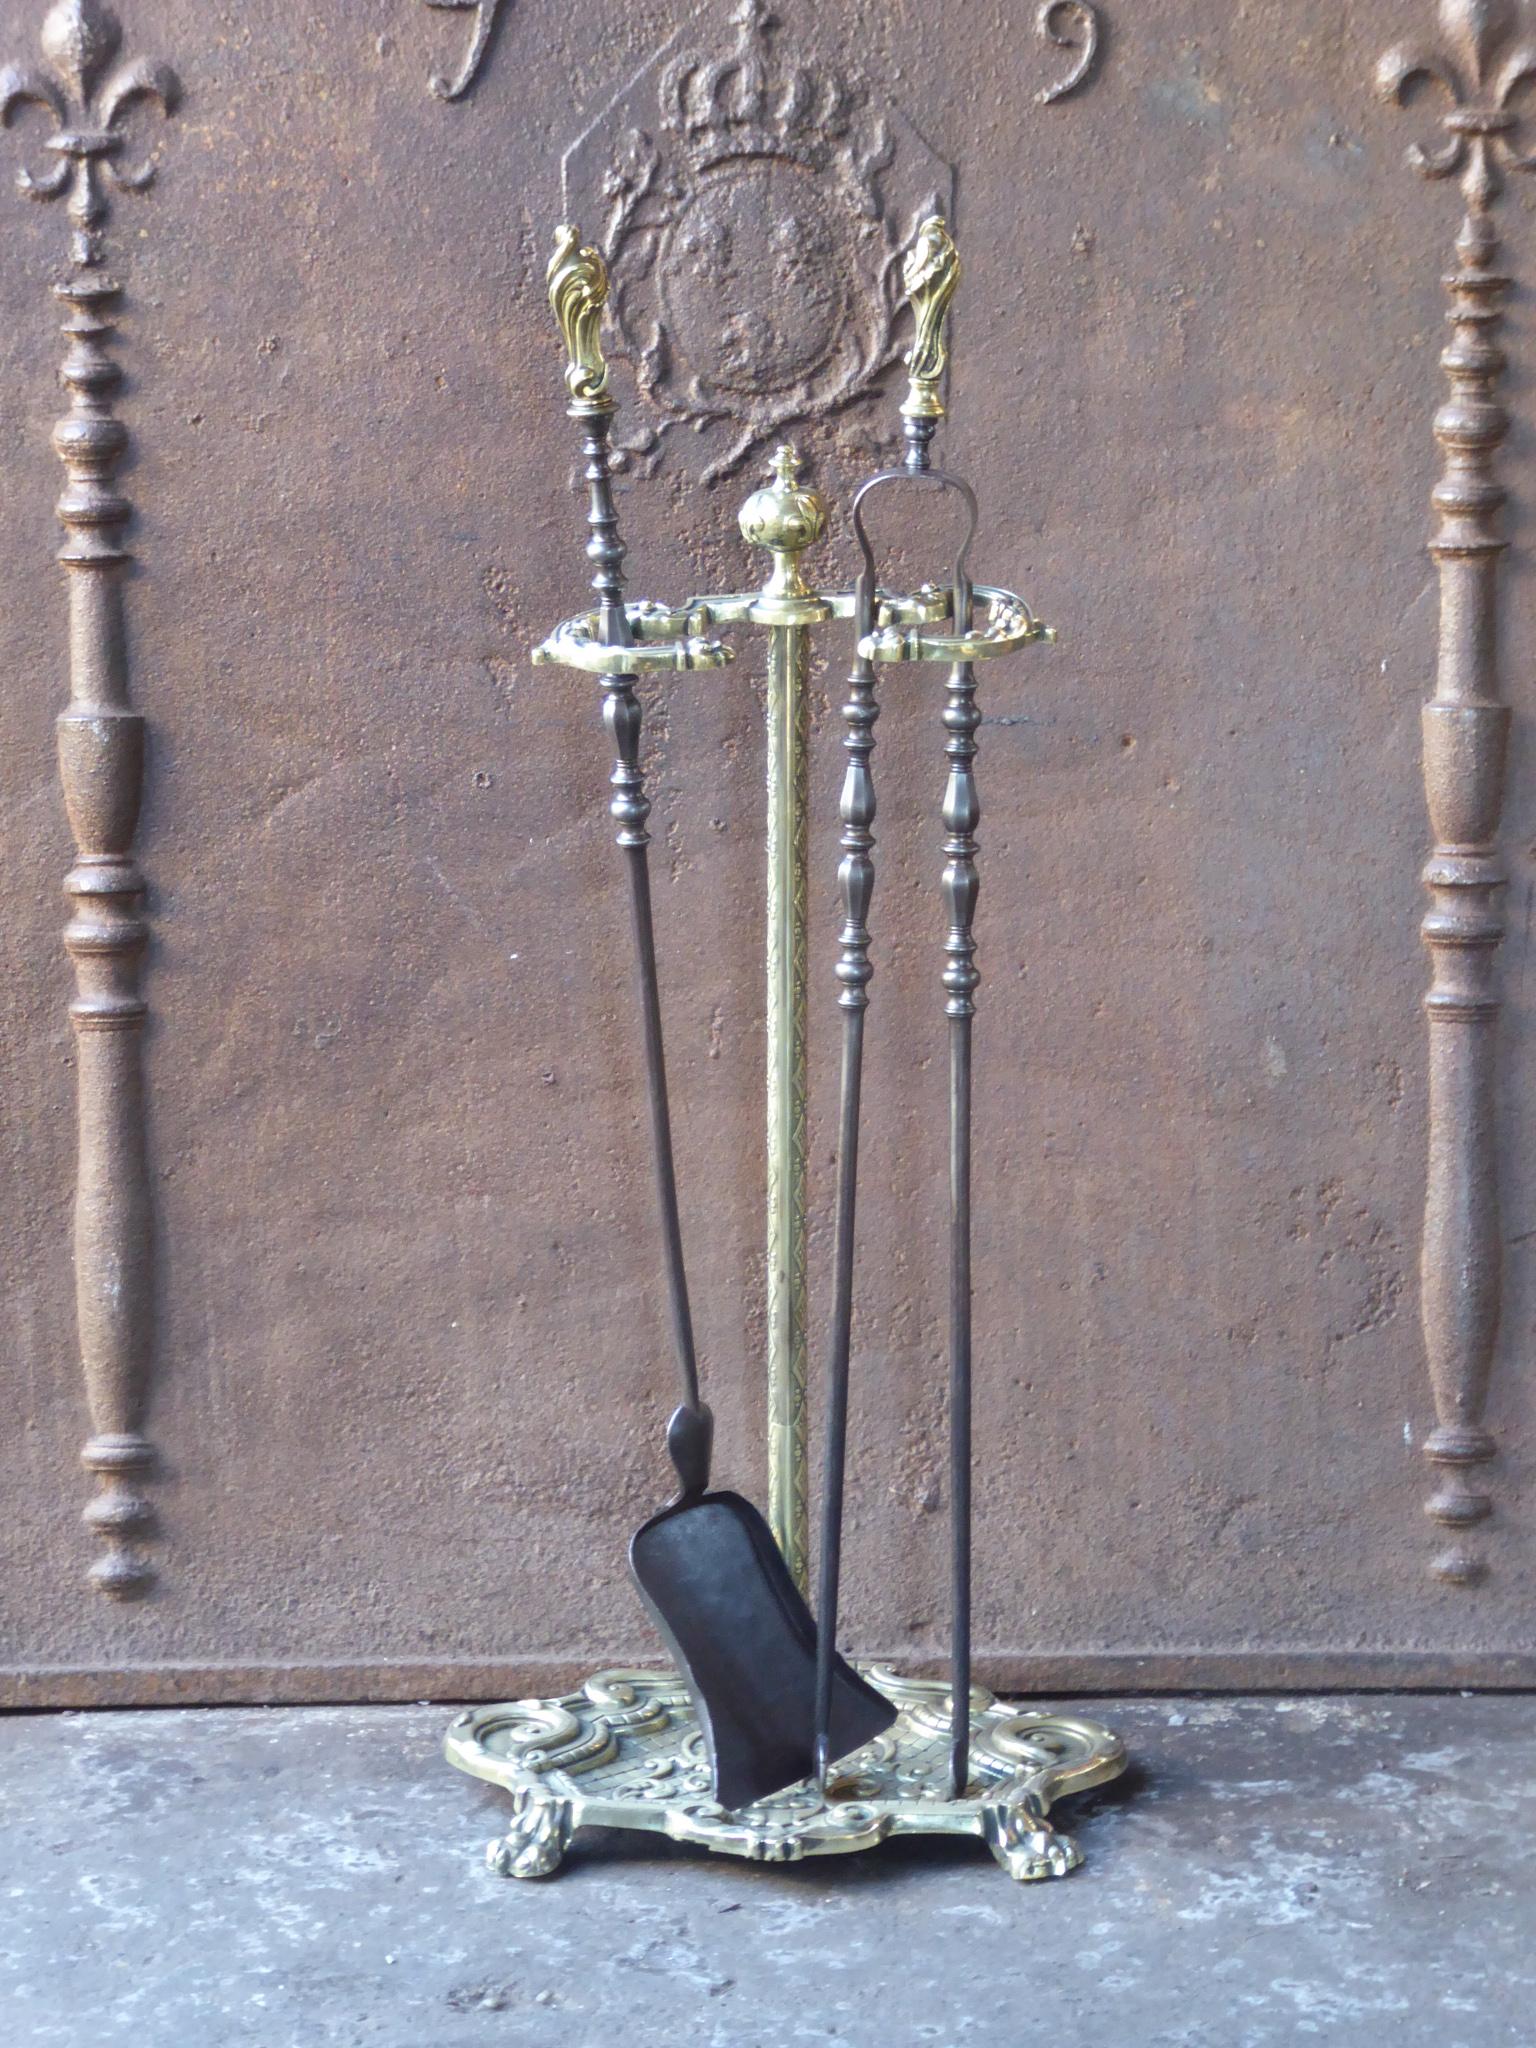 19th century French Napoleon III fireplace tool set. The toolset consists of a stand and two fire irons. Made of wrought iron and brass. It is in a good condition and is fully functional.
 
 





